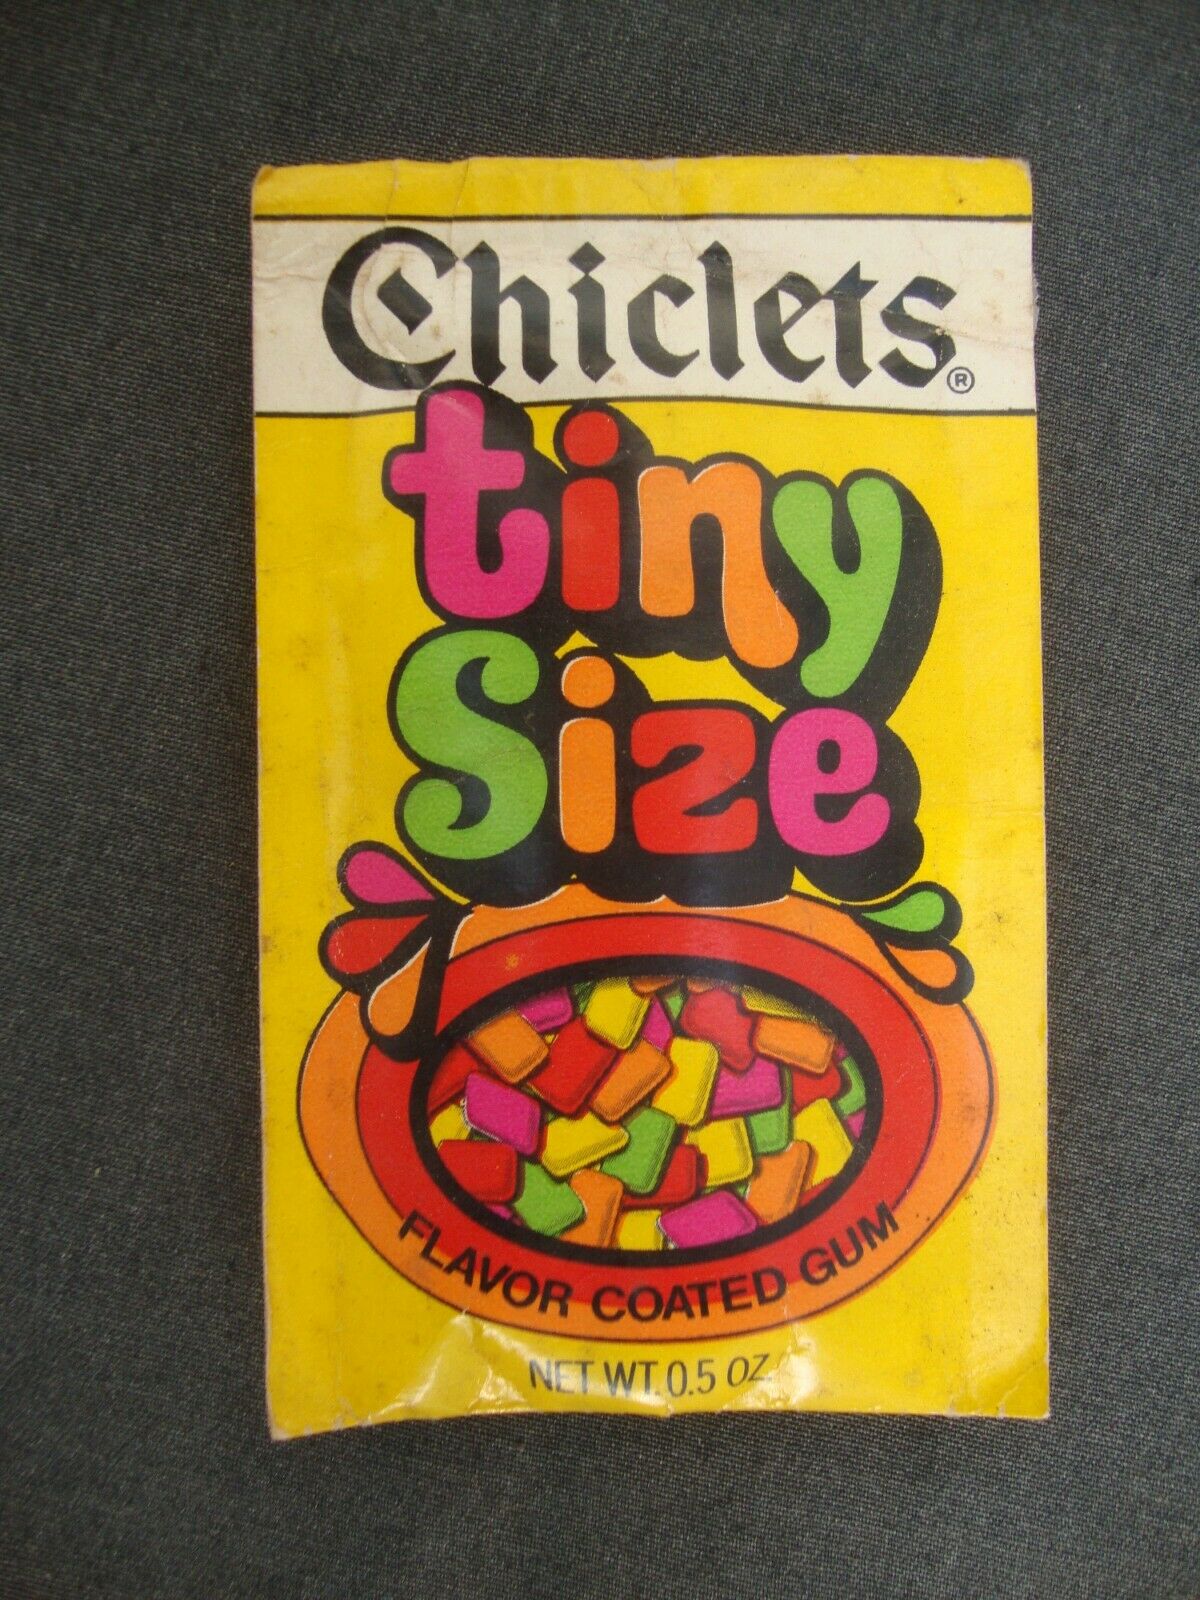 Vintage Chiclets Tiny Size Novelty Gum Rare Unopened Package Flavor Coated